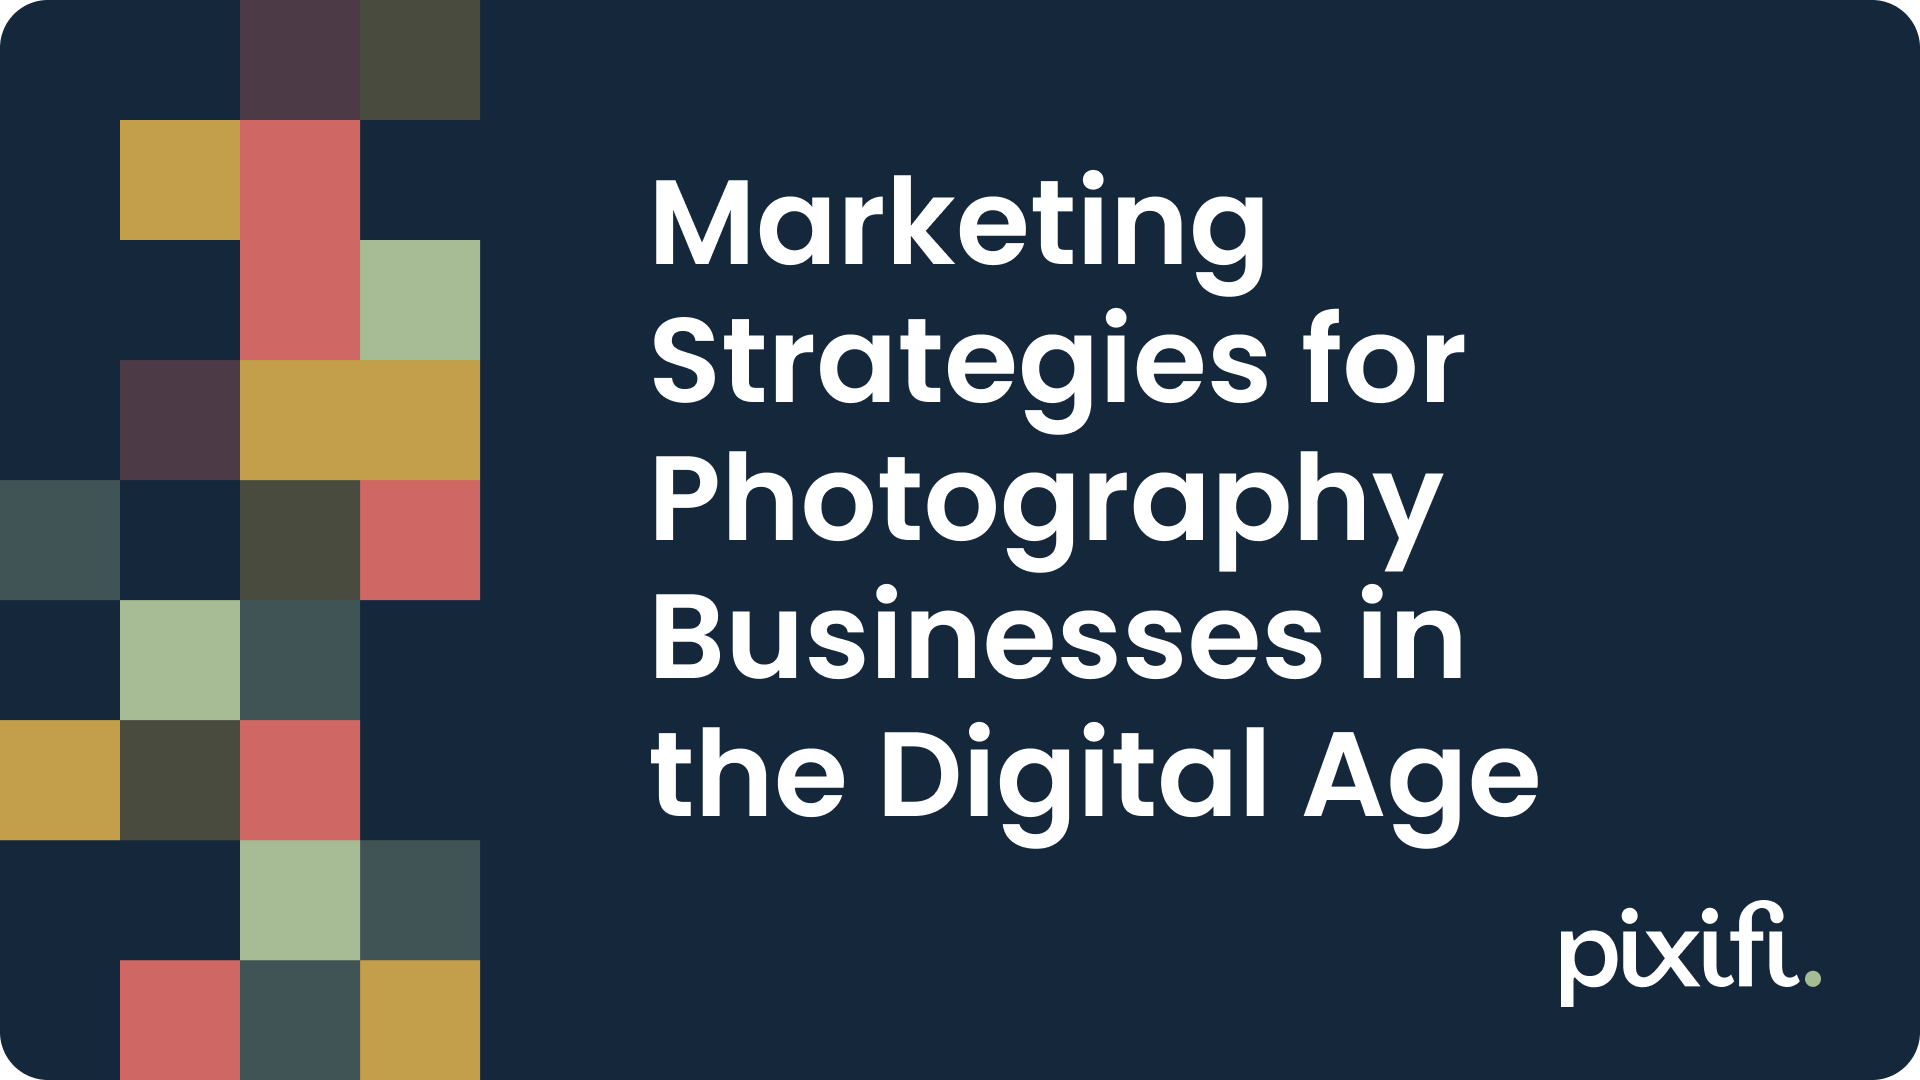 Marketing Strategies for Photography Businesses in the Digital Age